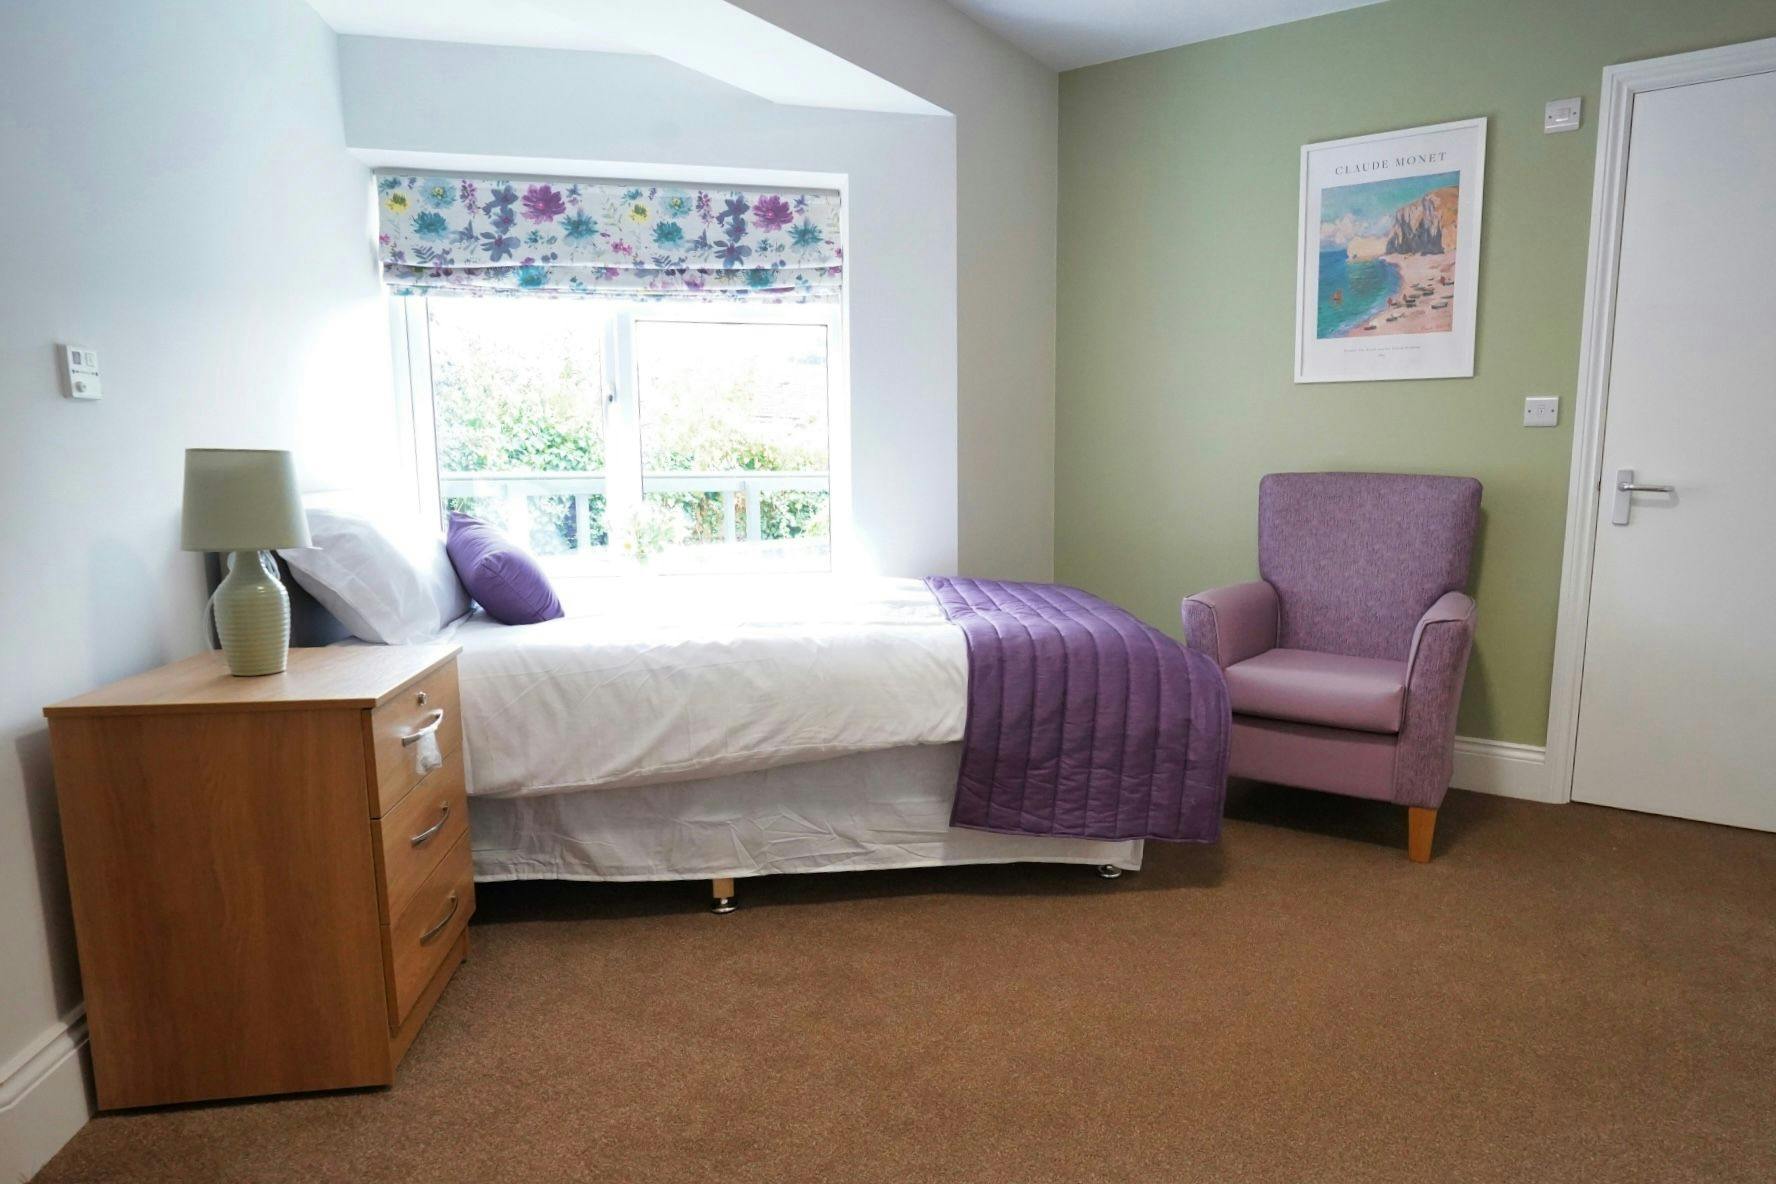 Bedroom at Ambleside Care Home in Bexhill, Rother